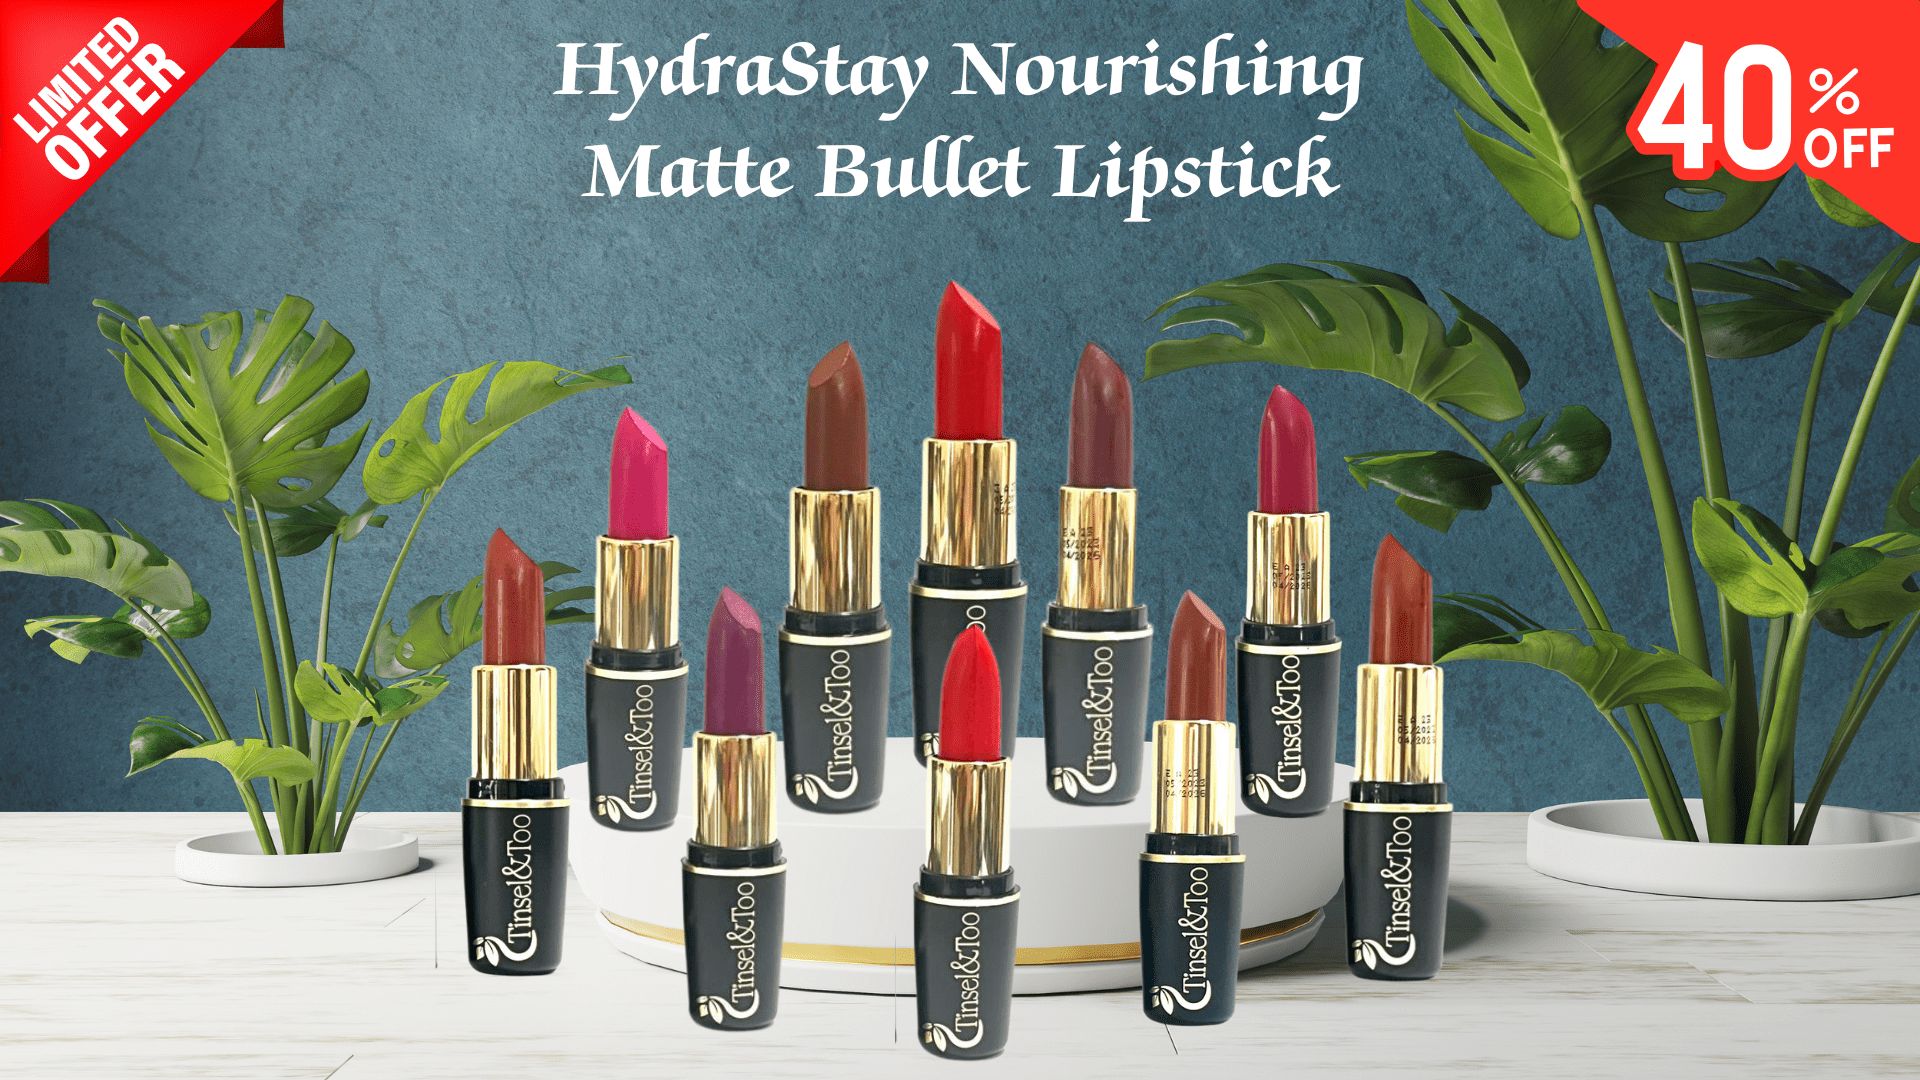 HydraStay Nourishing Matte Bullet Lipstick - By Tinsel and Too - Plant-based Clean Beauty Products at 40%Off